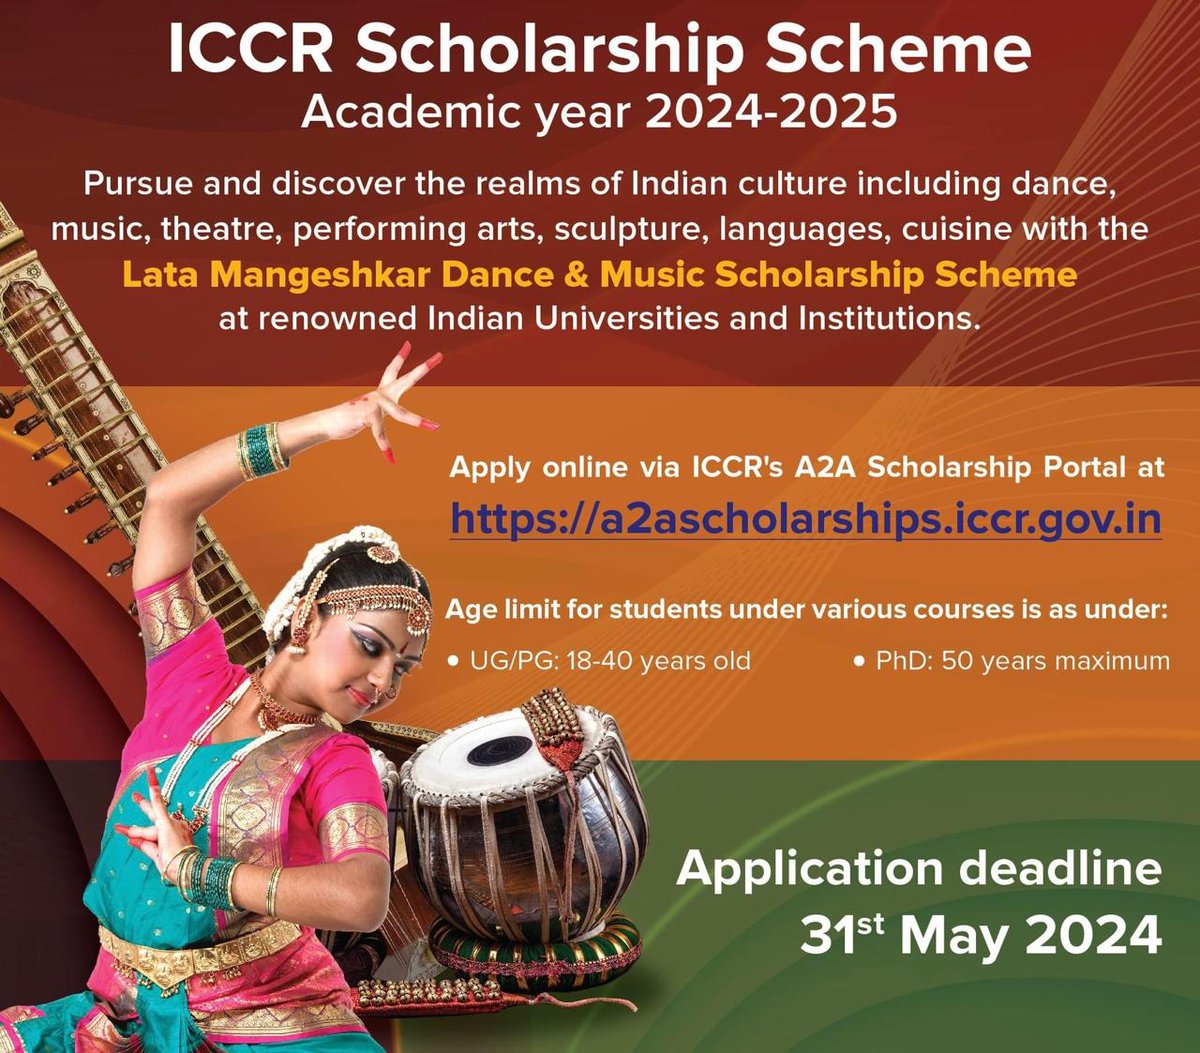 Get fully funded ICCR Scholarship to visit India and learn art, music, theatre, language, sculpture or cuisine in India. For enquiries please write to fseco.Pretoria@mea.gov.in #ICCR